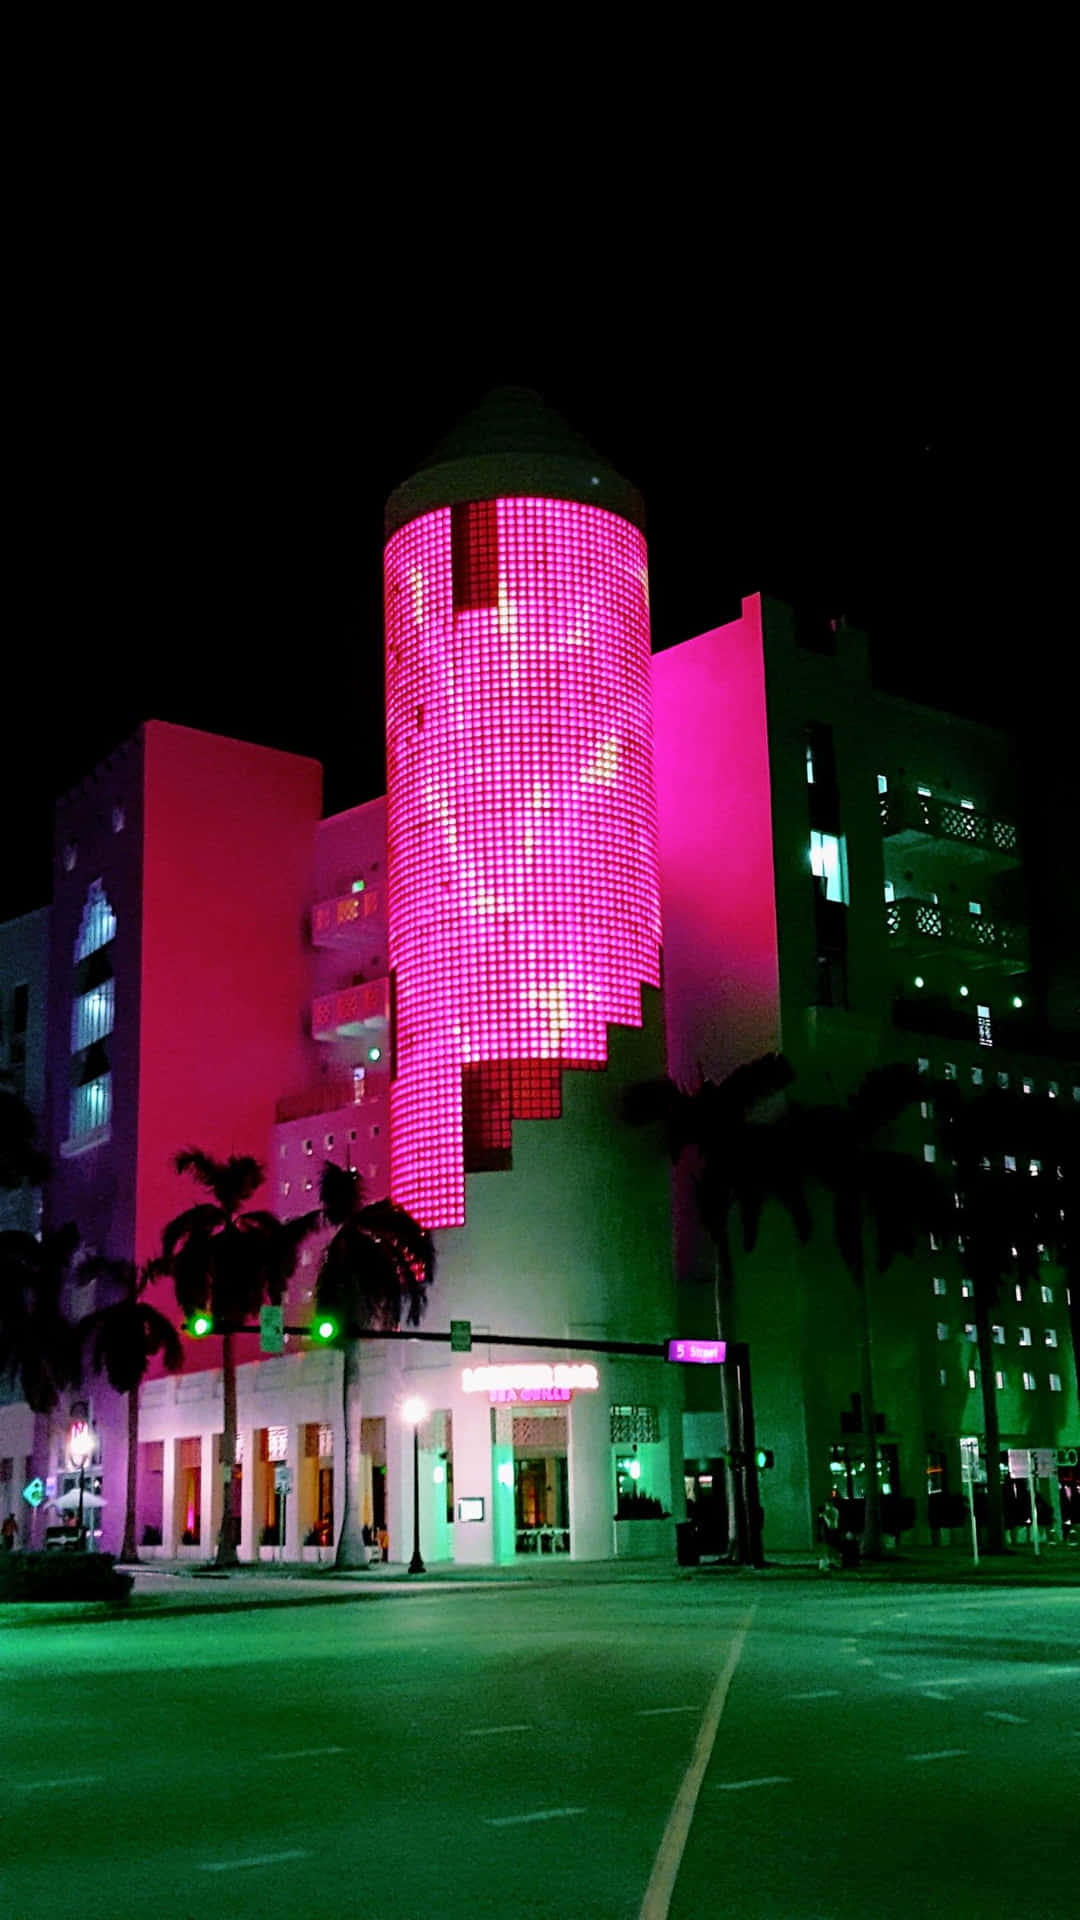 Relive a brighter time in Miami with this vintage style image. Wallpaper